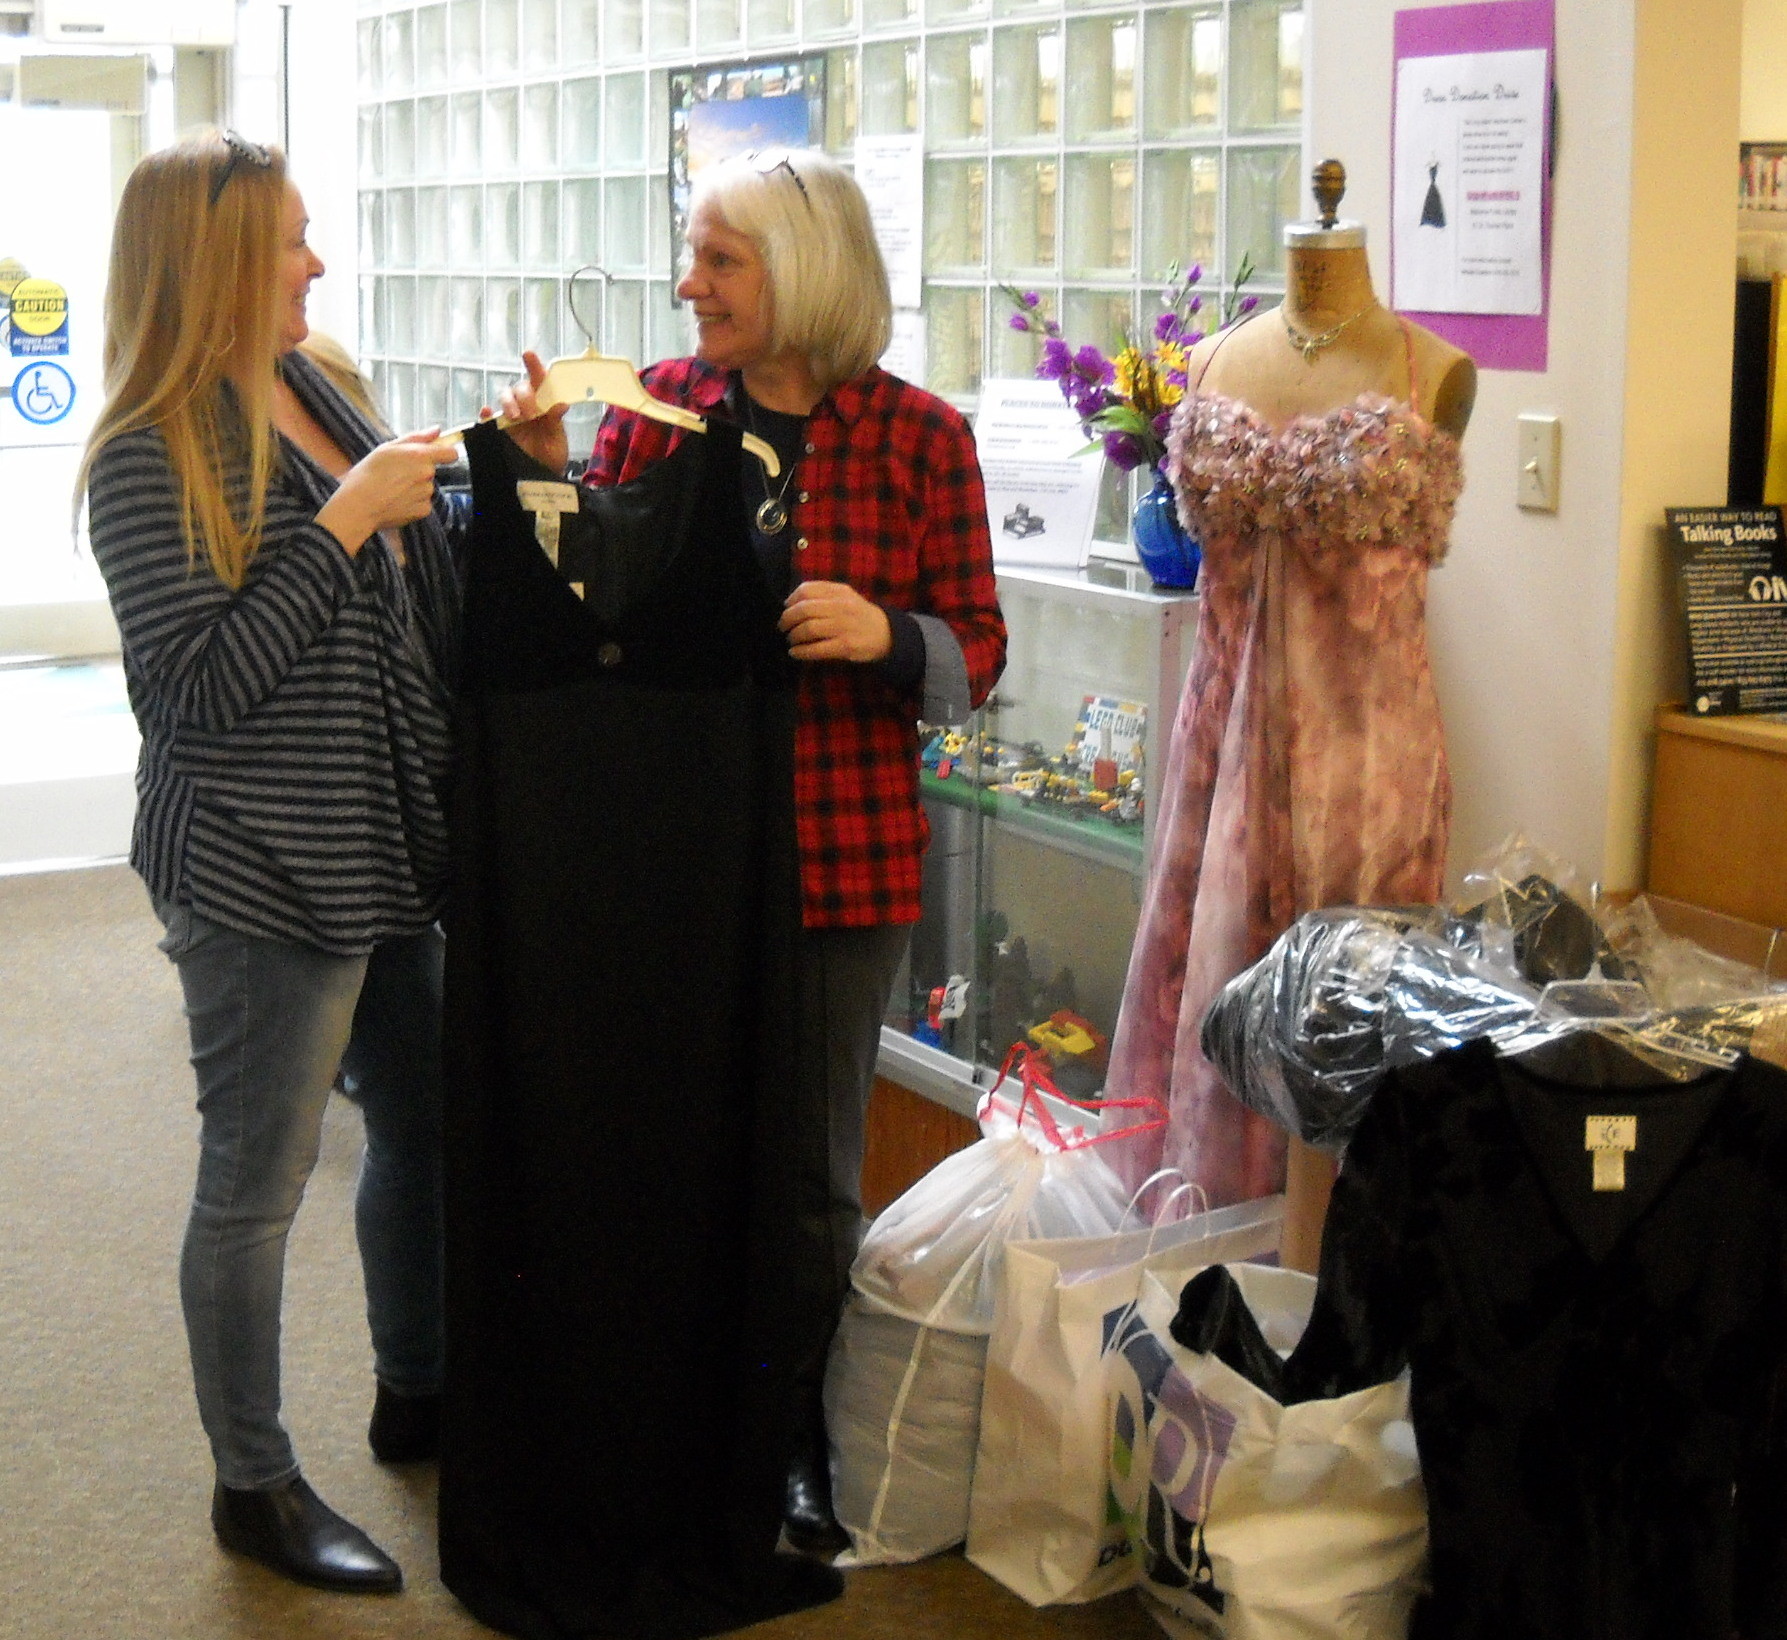 The Malverne Library is an official drop-off site for the Long Island Volunteer Center’s Prom Boutique, an island-wide effort to provide prom dresses to economically disadvantaged girls. Here, volunteer Michele Esselborn, left, gathers donations left at the library with Malverne librarian, Cathy Wellikoff.